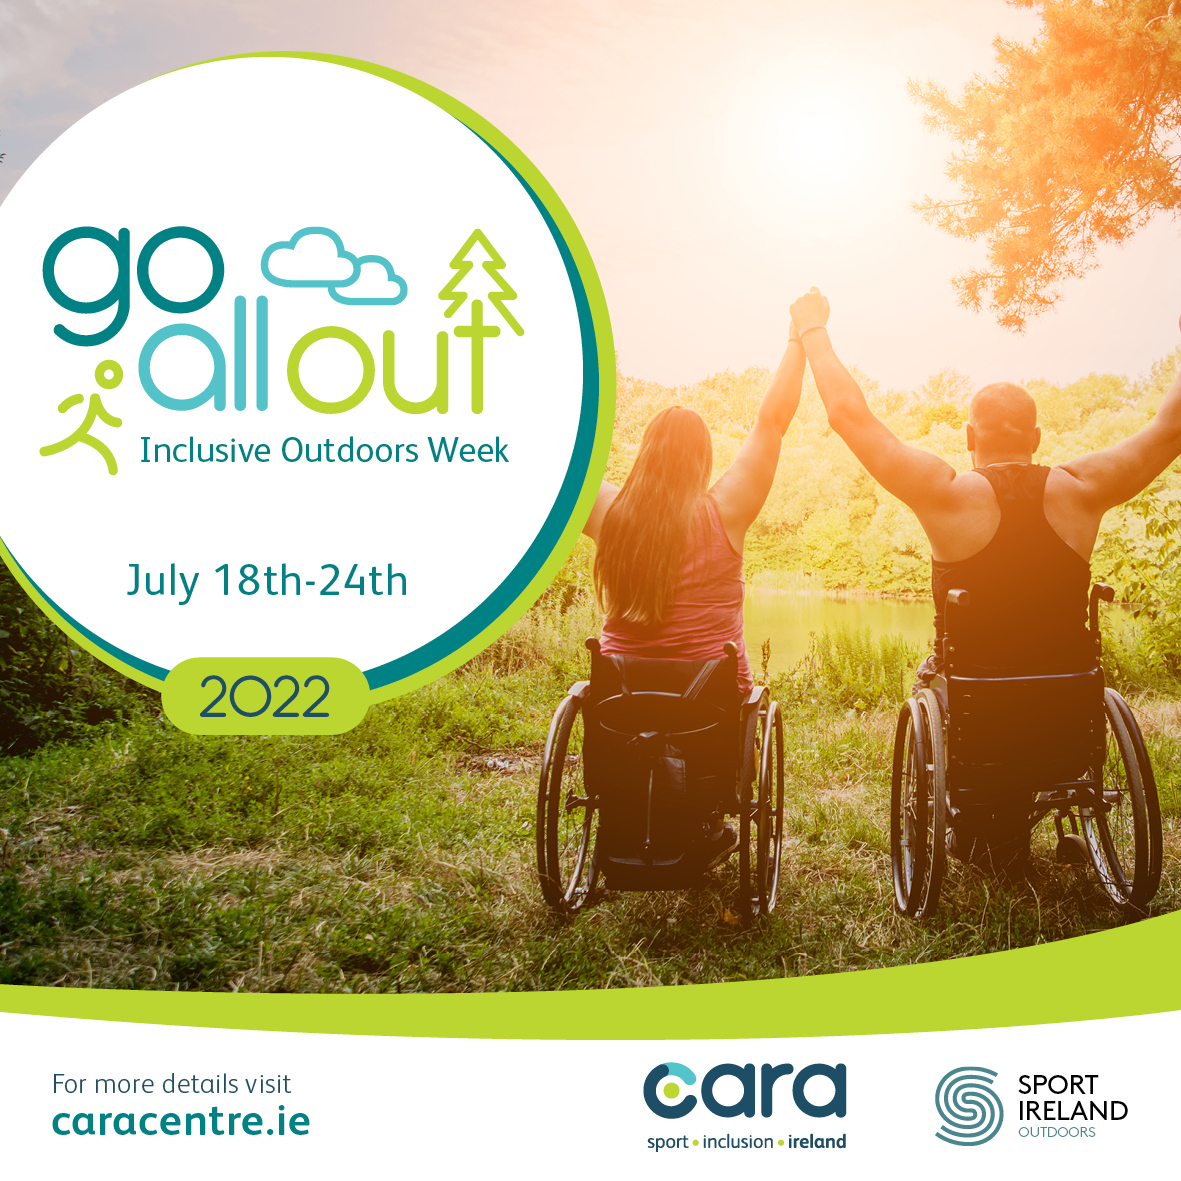 We are supporting Cara Sport Inclusion Ireland’s inaugural “Go All Out” week 18th-24th July. facebook.com/Ballincolligpa… #goallout2022 #sportinclusionireland #activeoutdoors #disability #activedisability #inclusiveoutdoors #activelifestyle @caracentre @sportireland